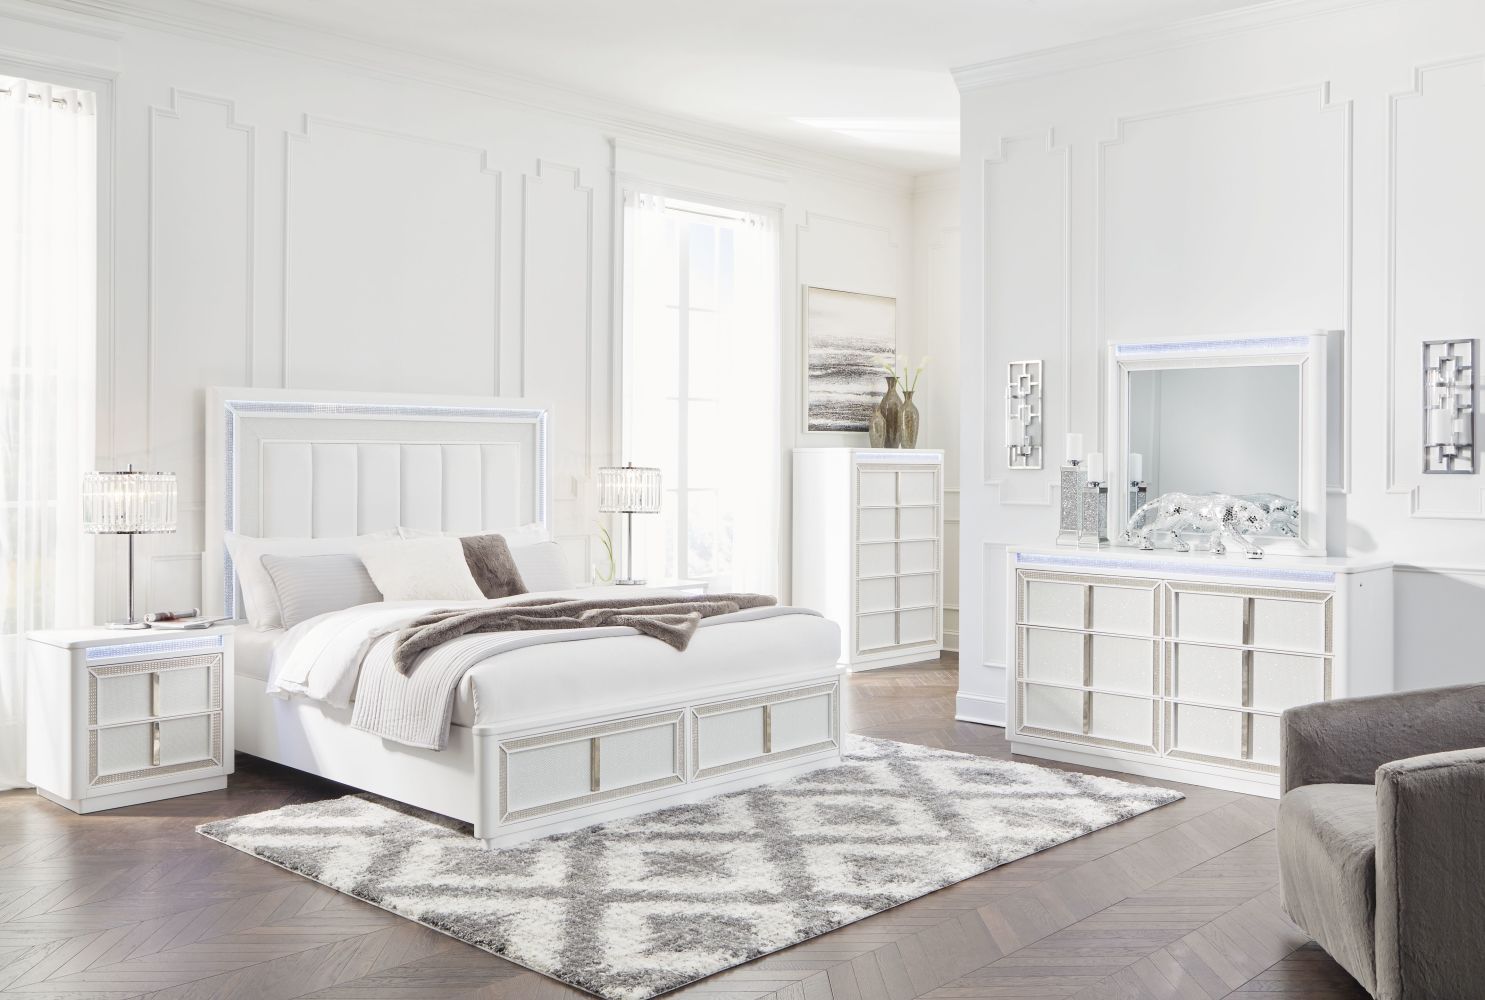 Chalanna – White – 8 Pc. – Dresser, Mirror, Chest, California King Upholstered Storage Bed, 2 Nightstands B822/31/36/46/58/56S/94/92(2)